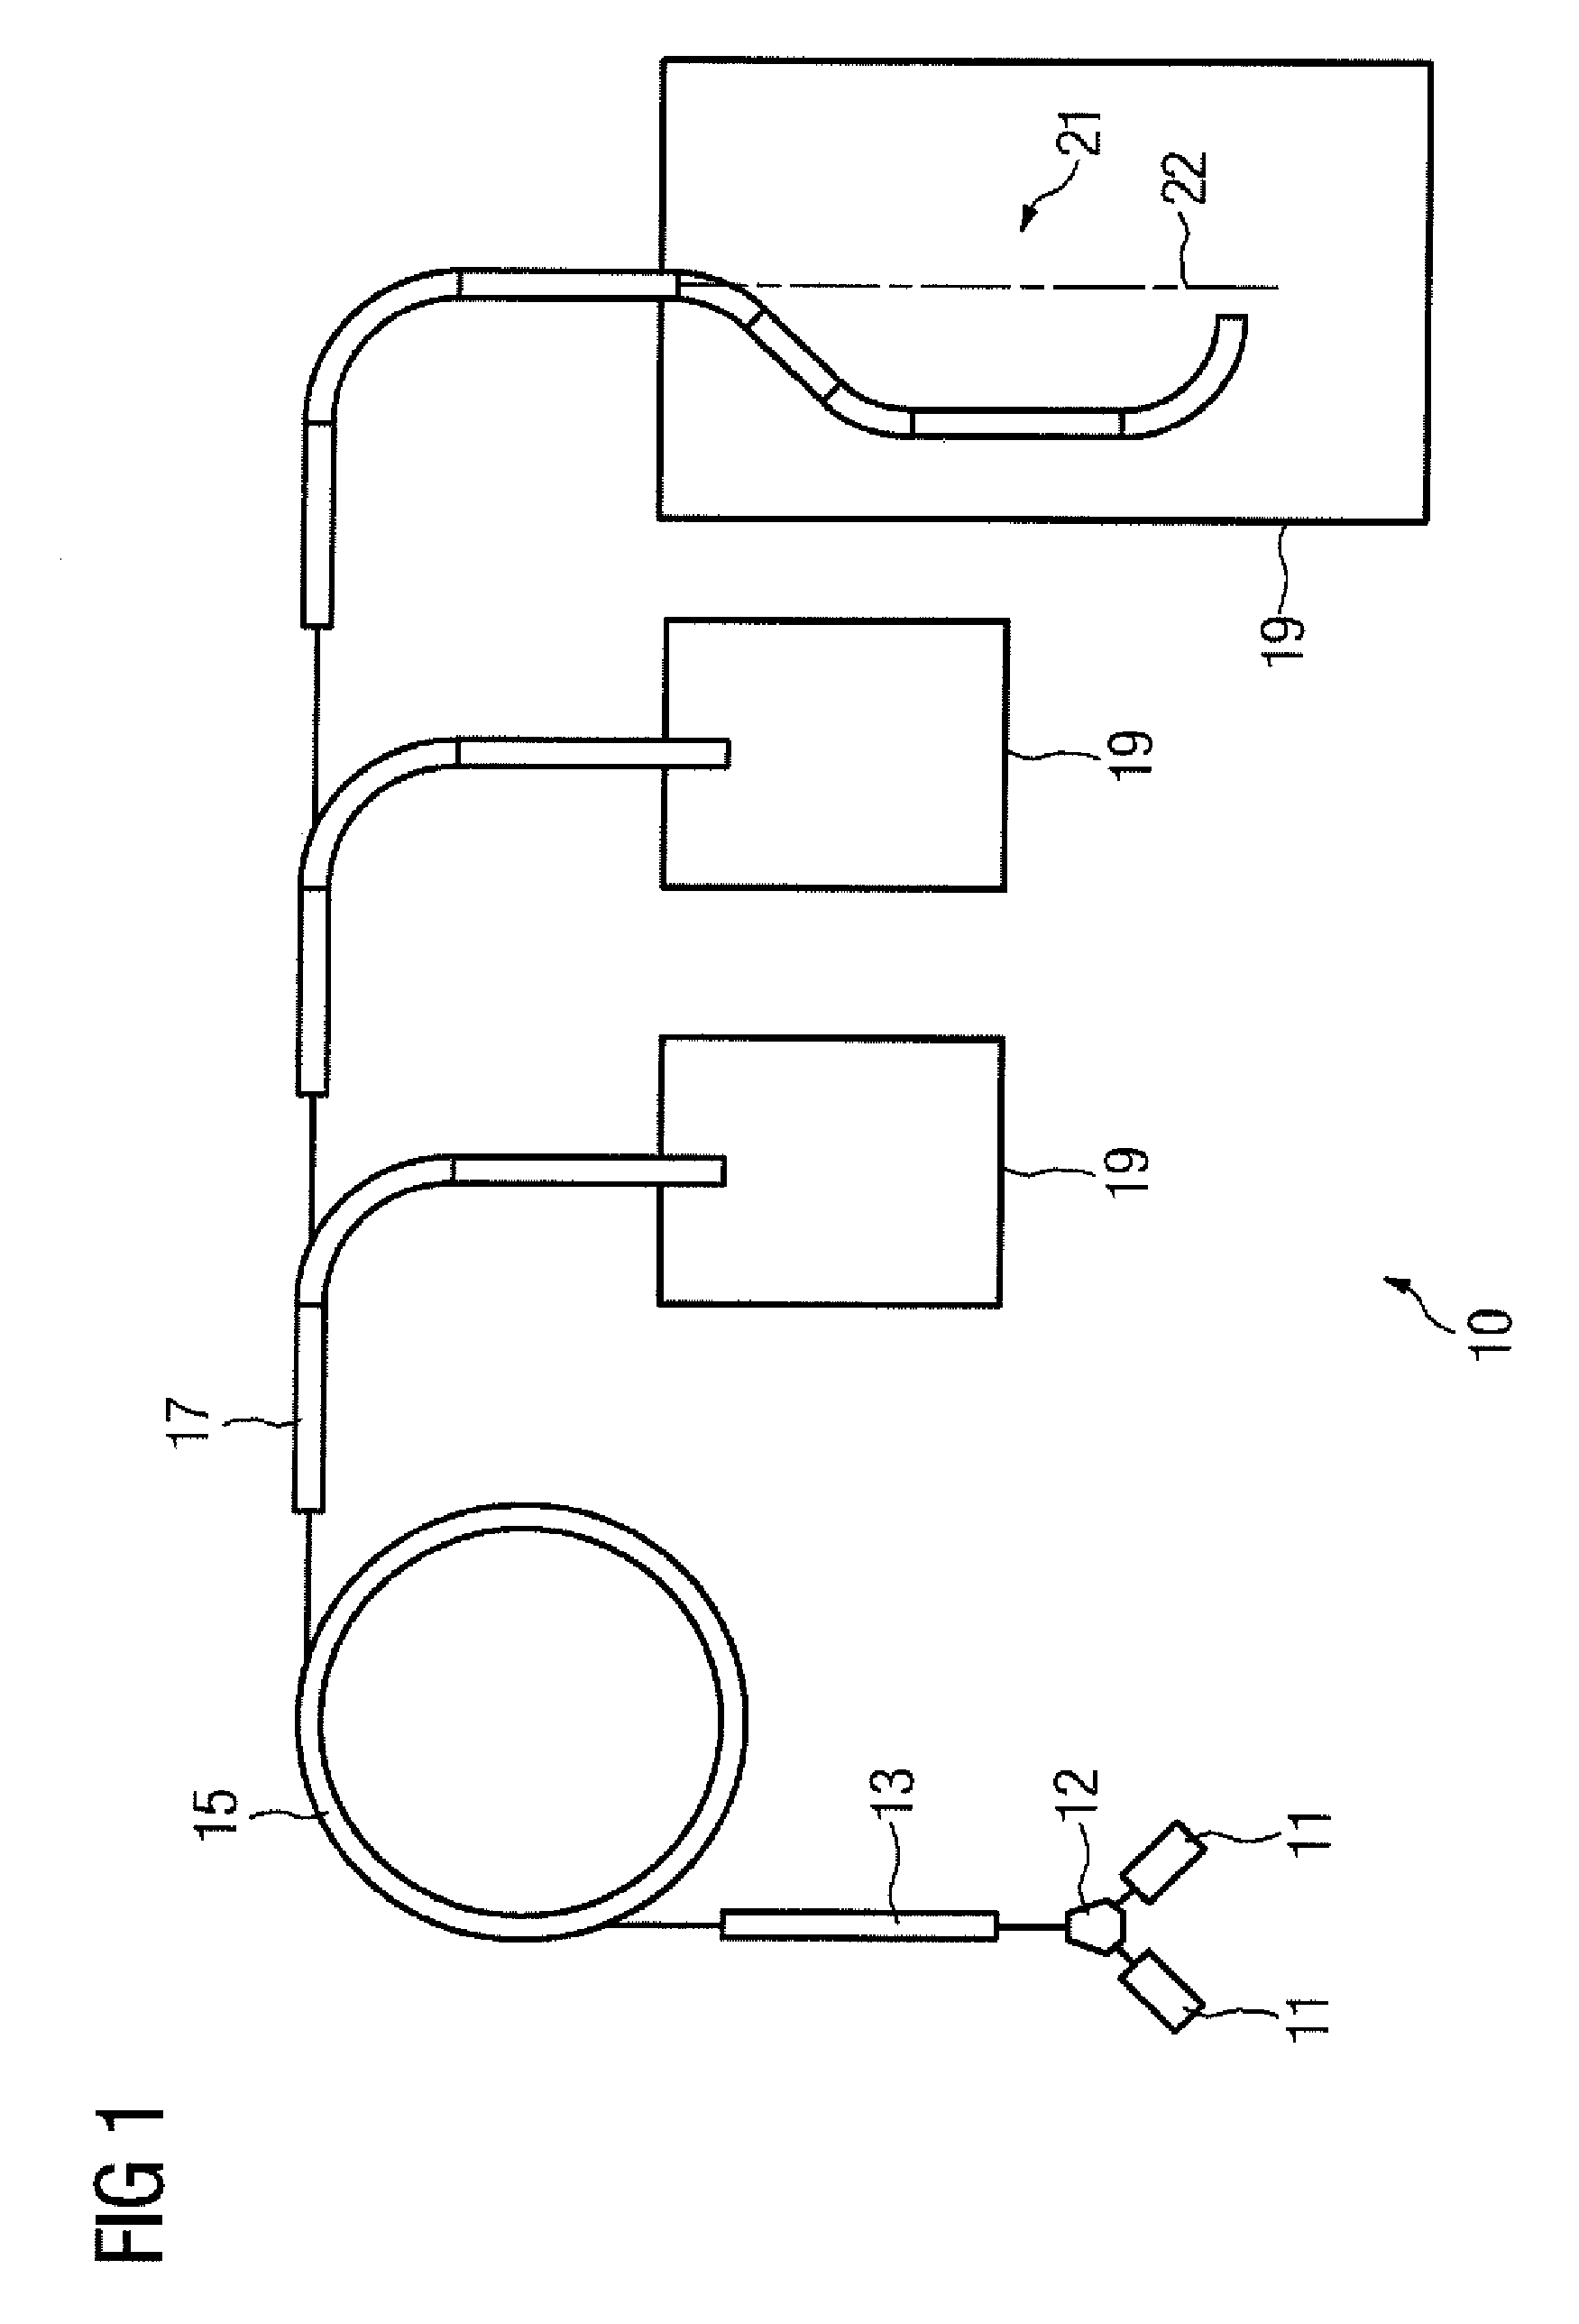 Control unit and method for controlling a radiation therapy system, and radiation therapy system